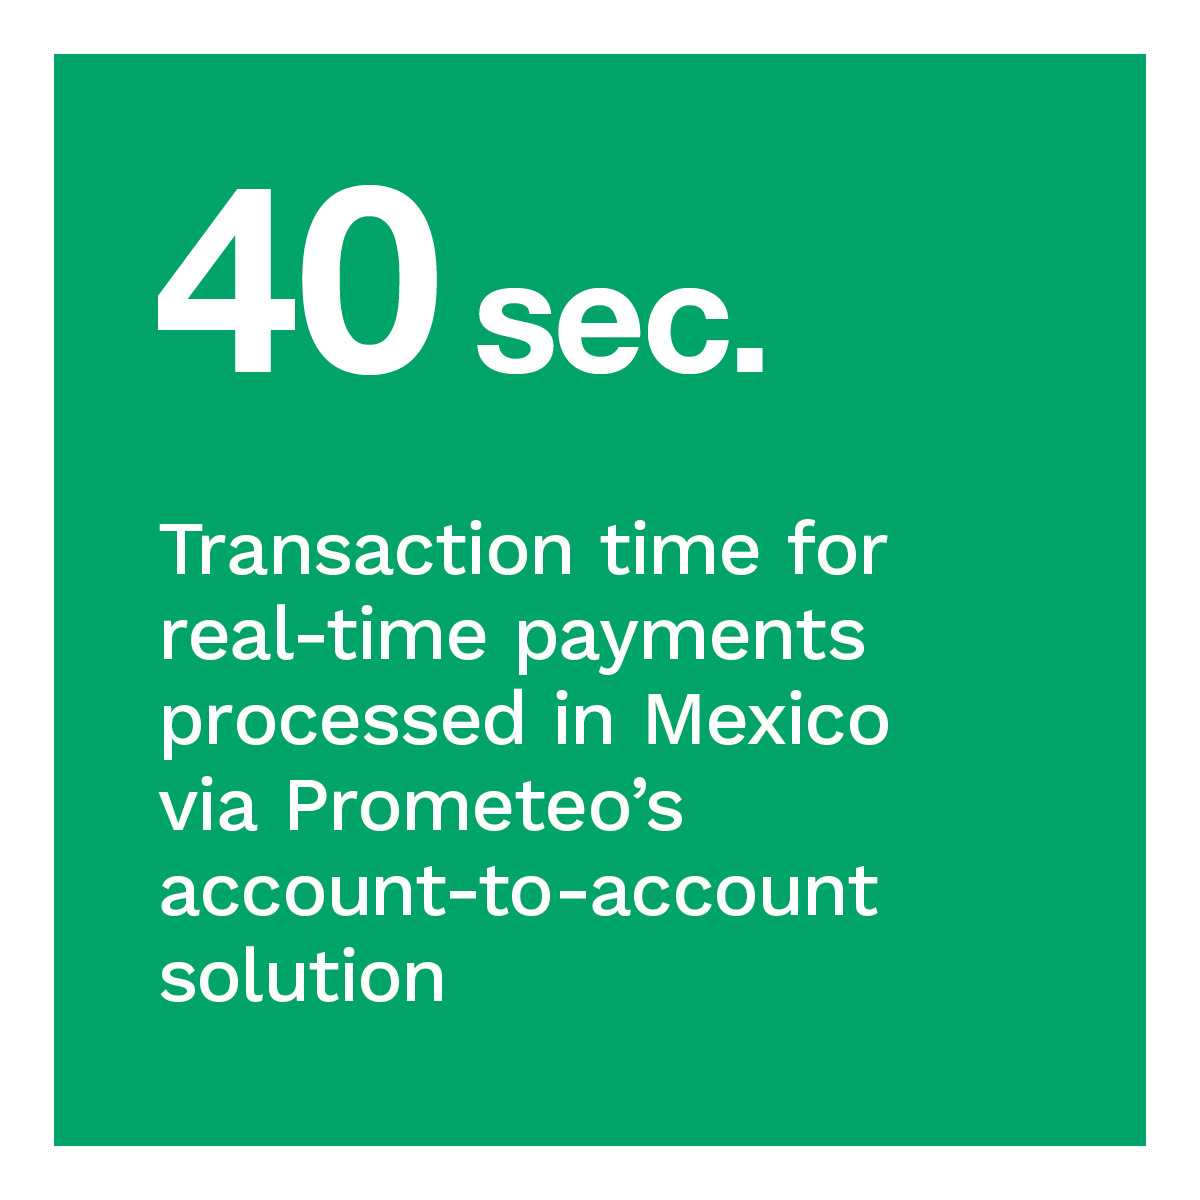 40 sec.: Transaction time for real-time payments processed in Mexico via Prometeo’s account-to-account solution